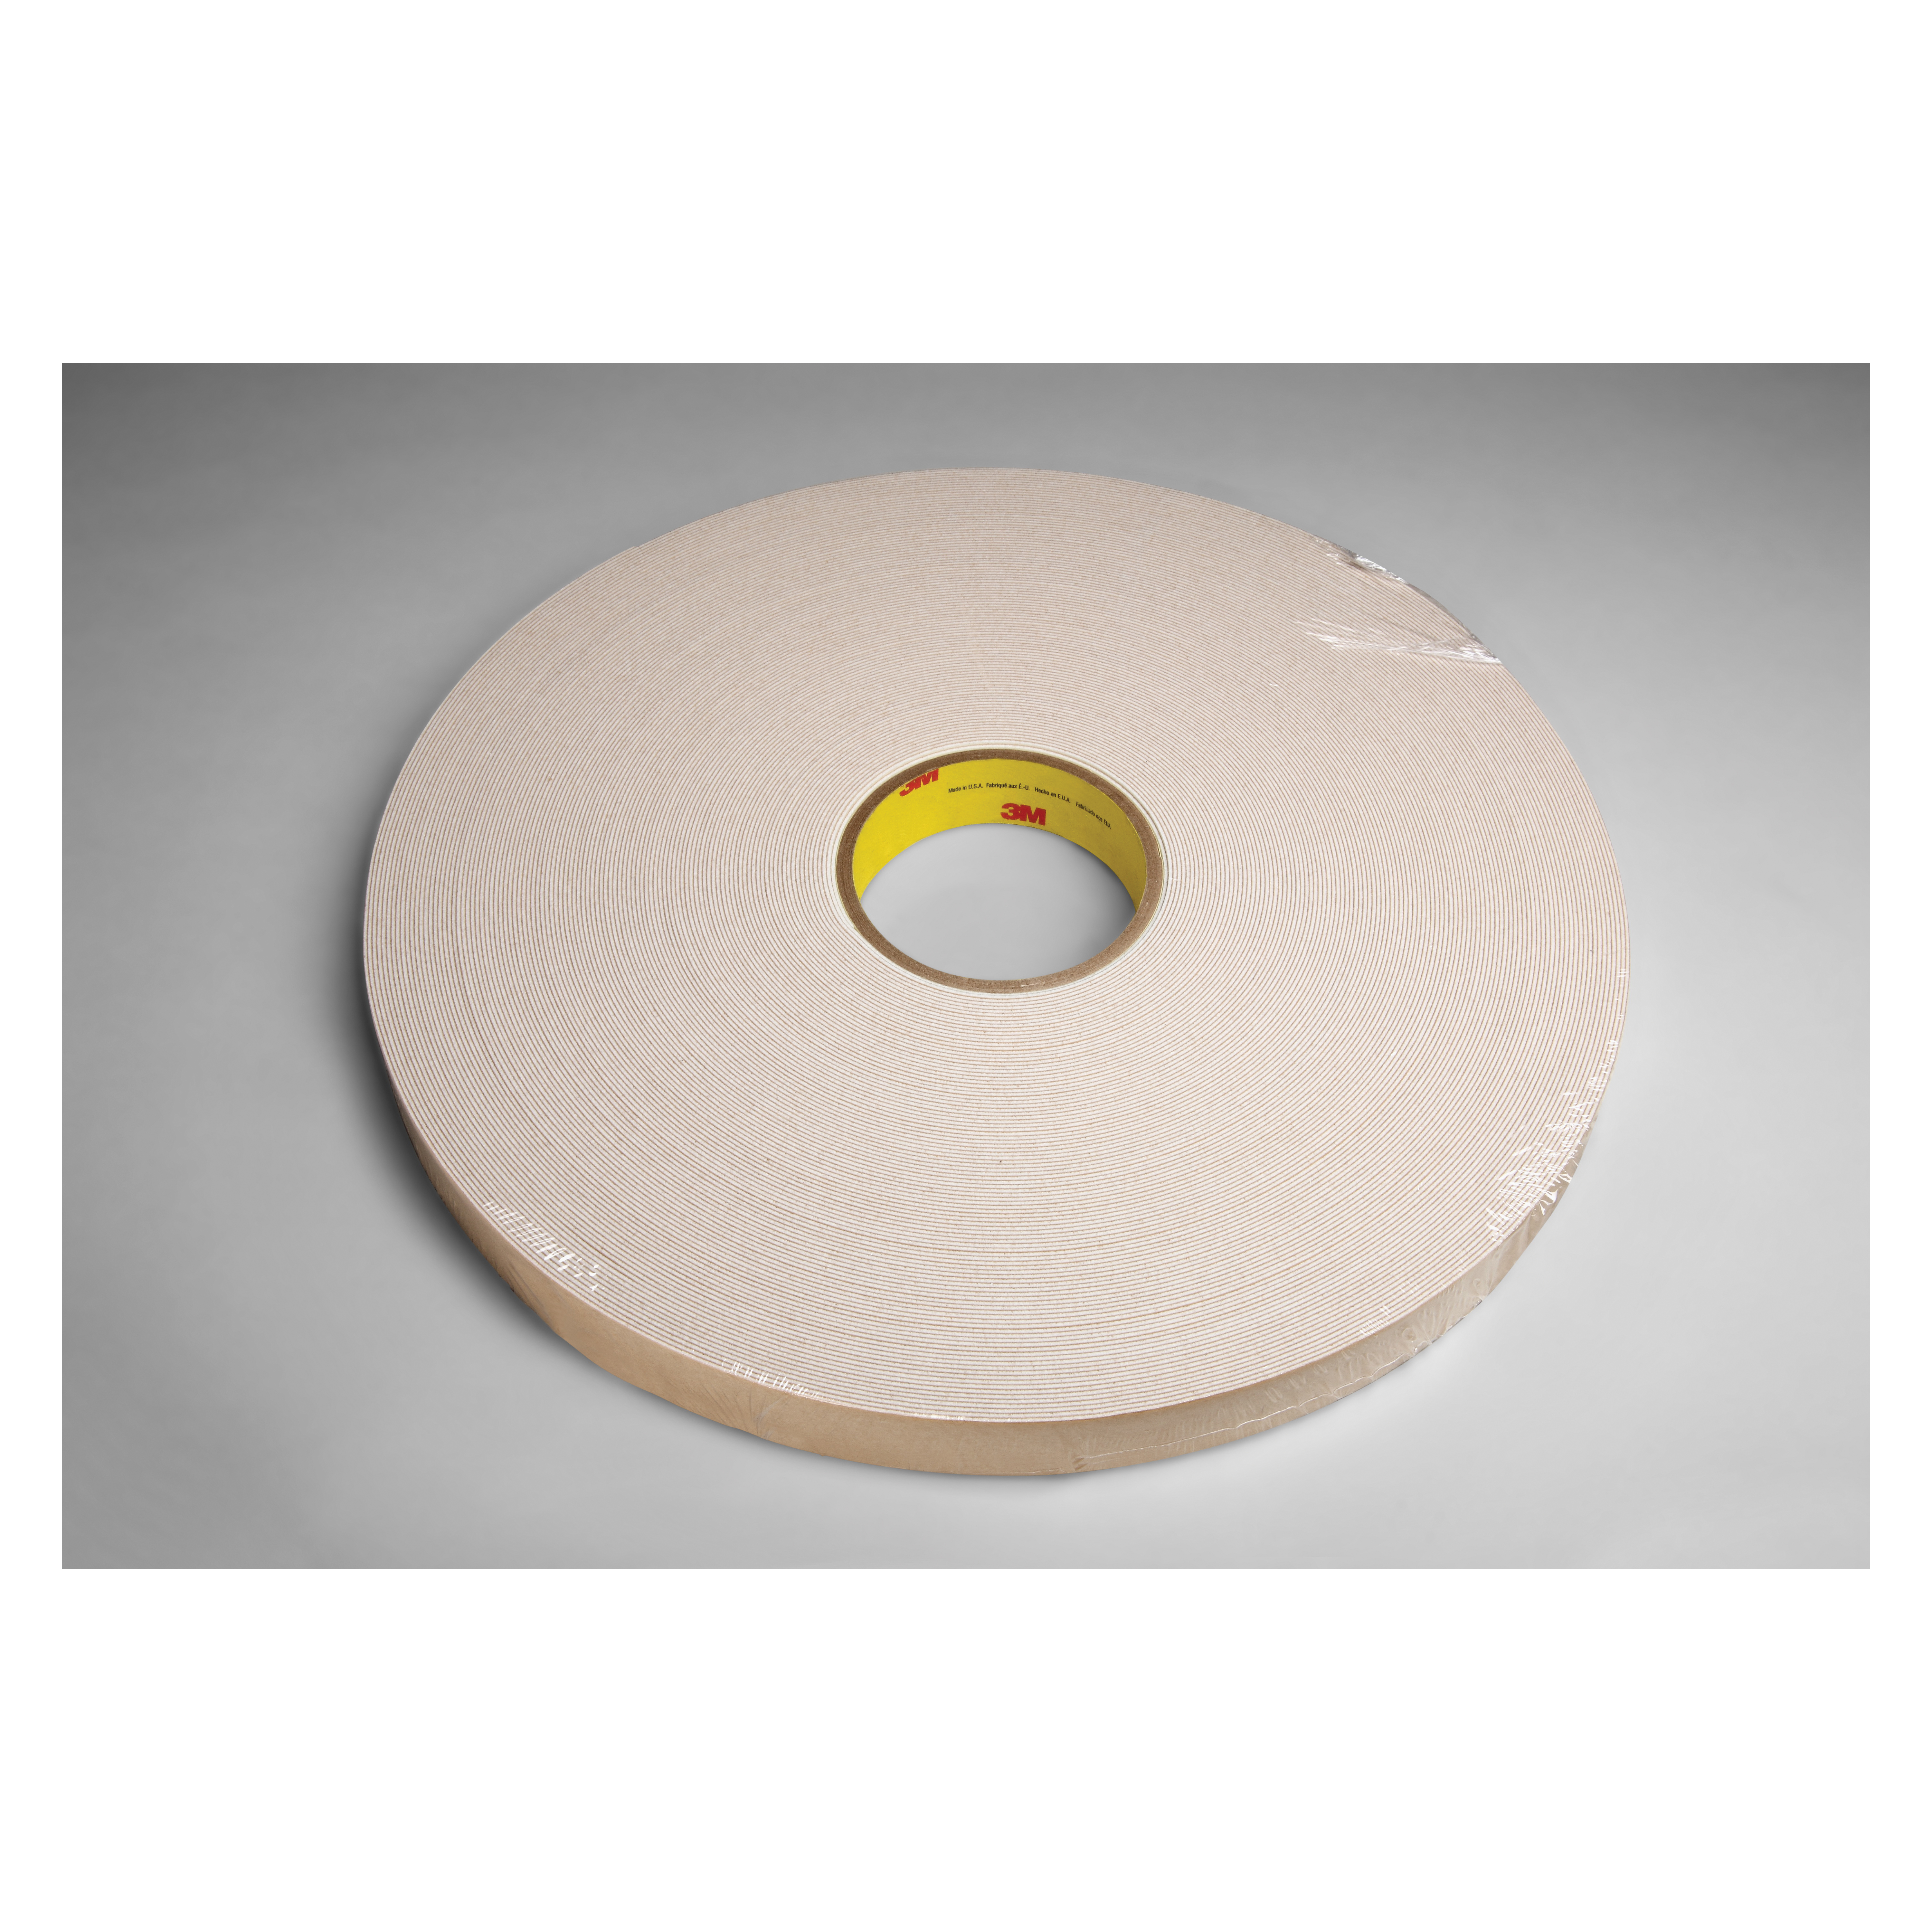 3M™ 021200-17660 Double Coated Tape, 72 yd L x 1/2 in W, 45 mil THK, Rubber Adhesive, Urethane Foam Backing, Natural